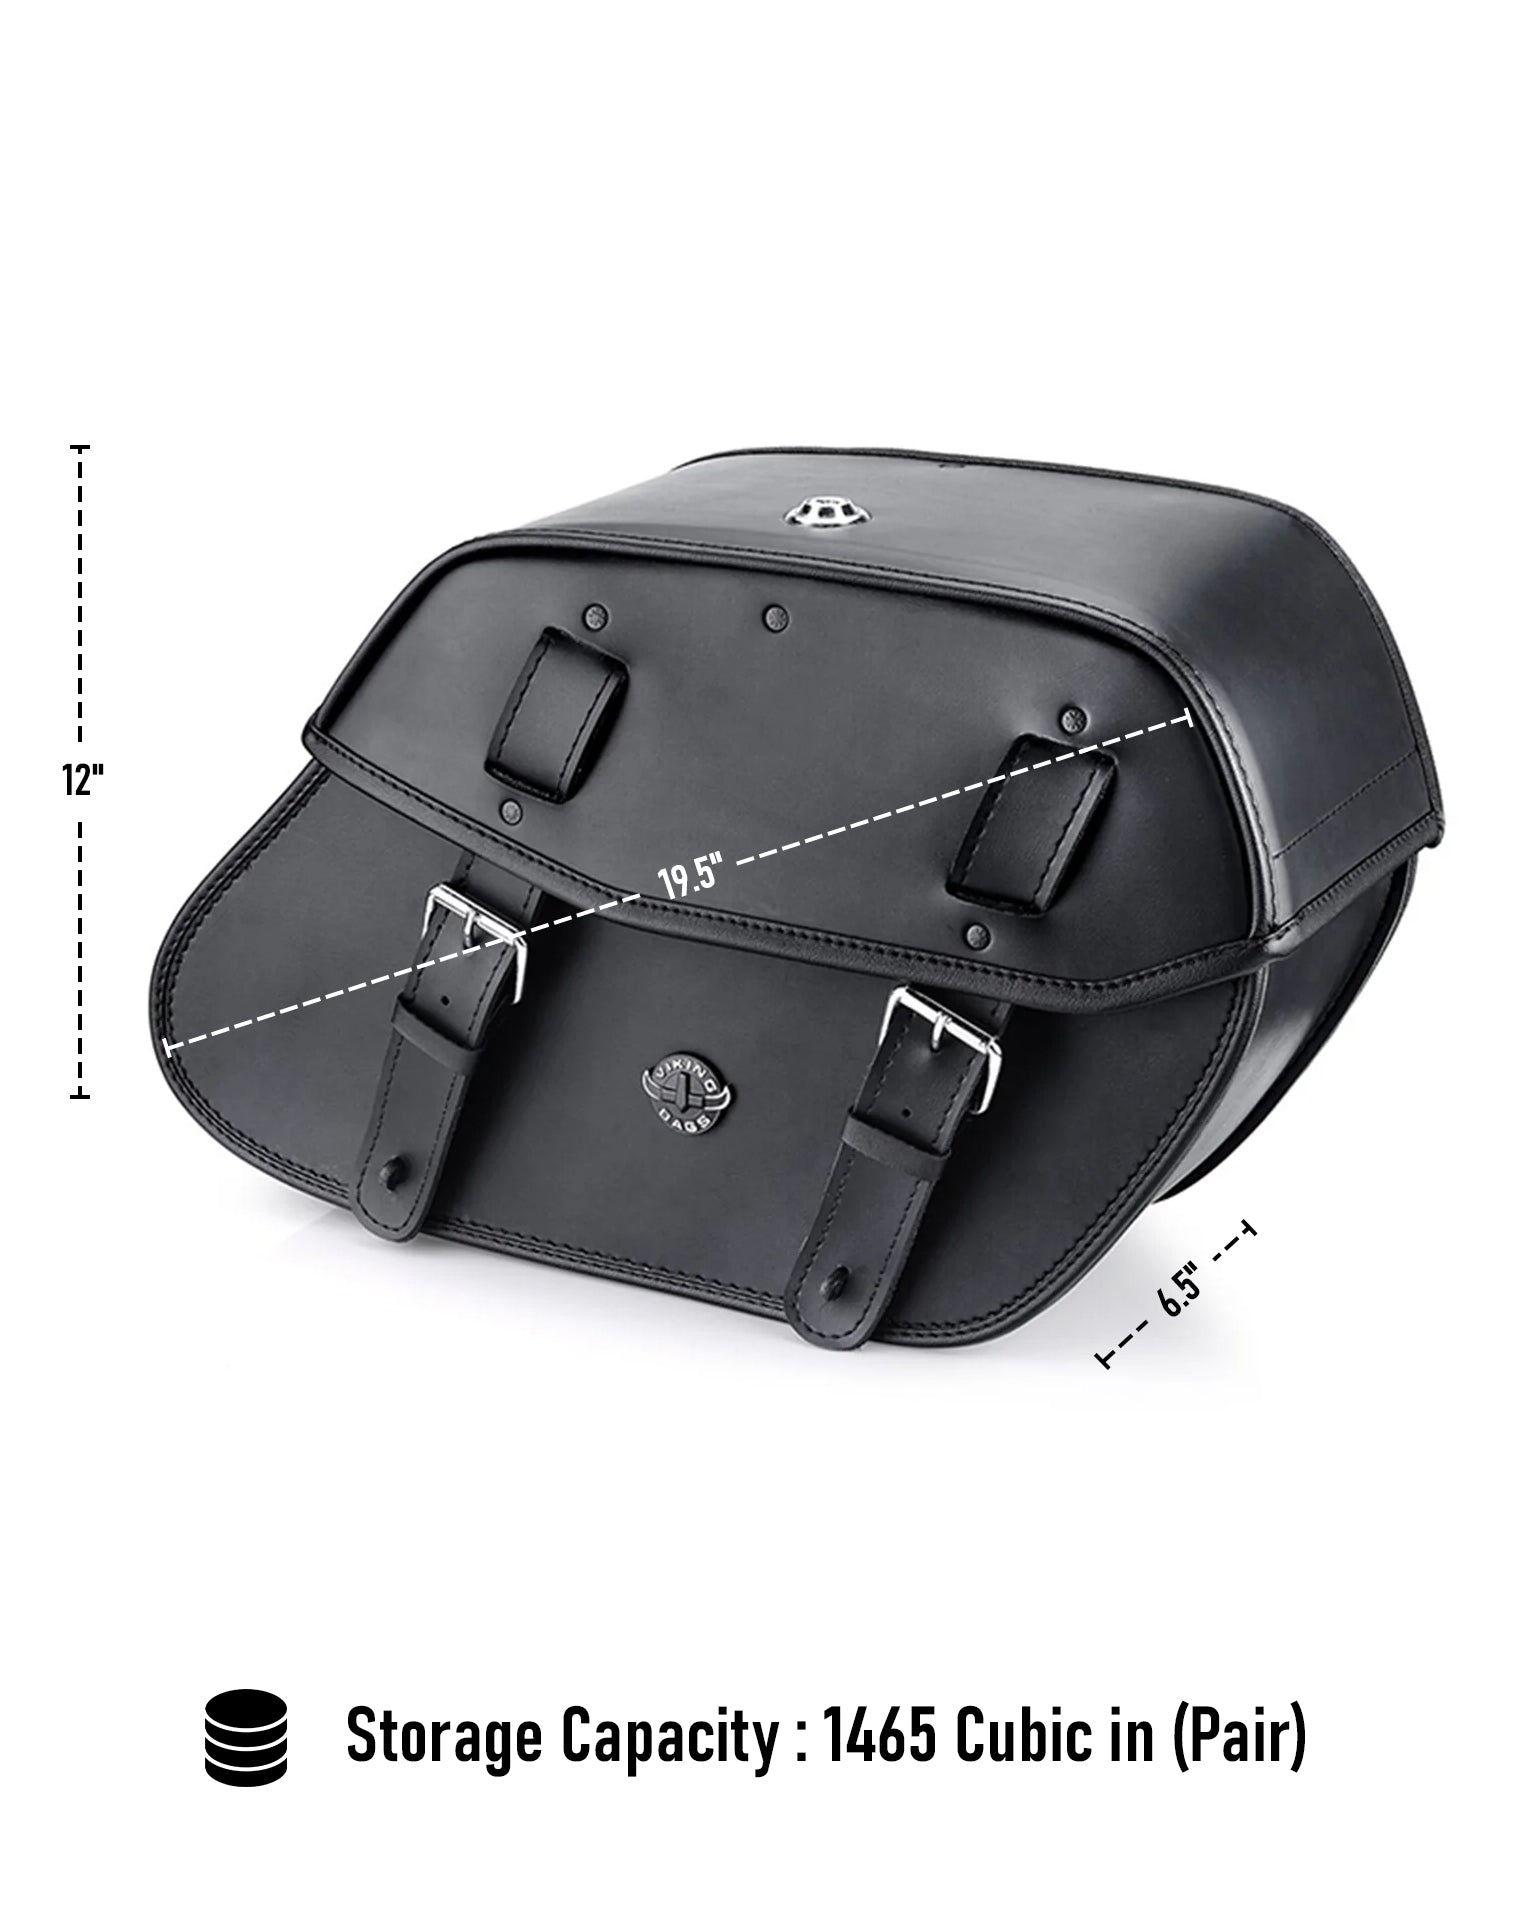 Viking Odin Large Suzuki Boulevard M90 Vz1500 Leather Motorcycle Saddlebags Can Store Your Ridings Gears